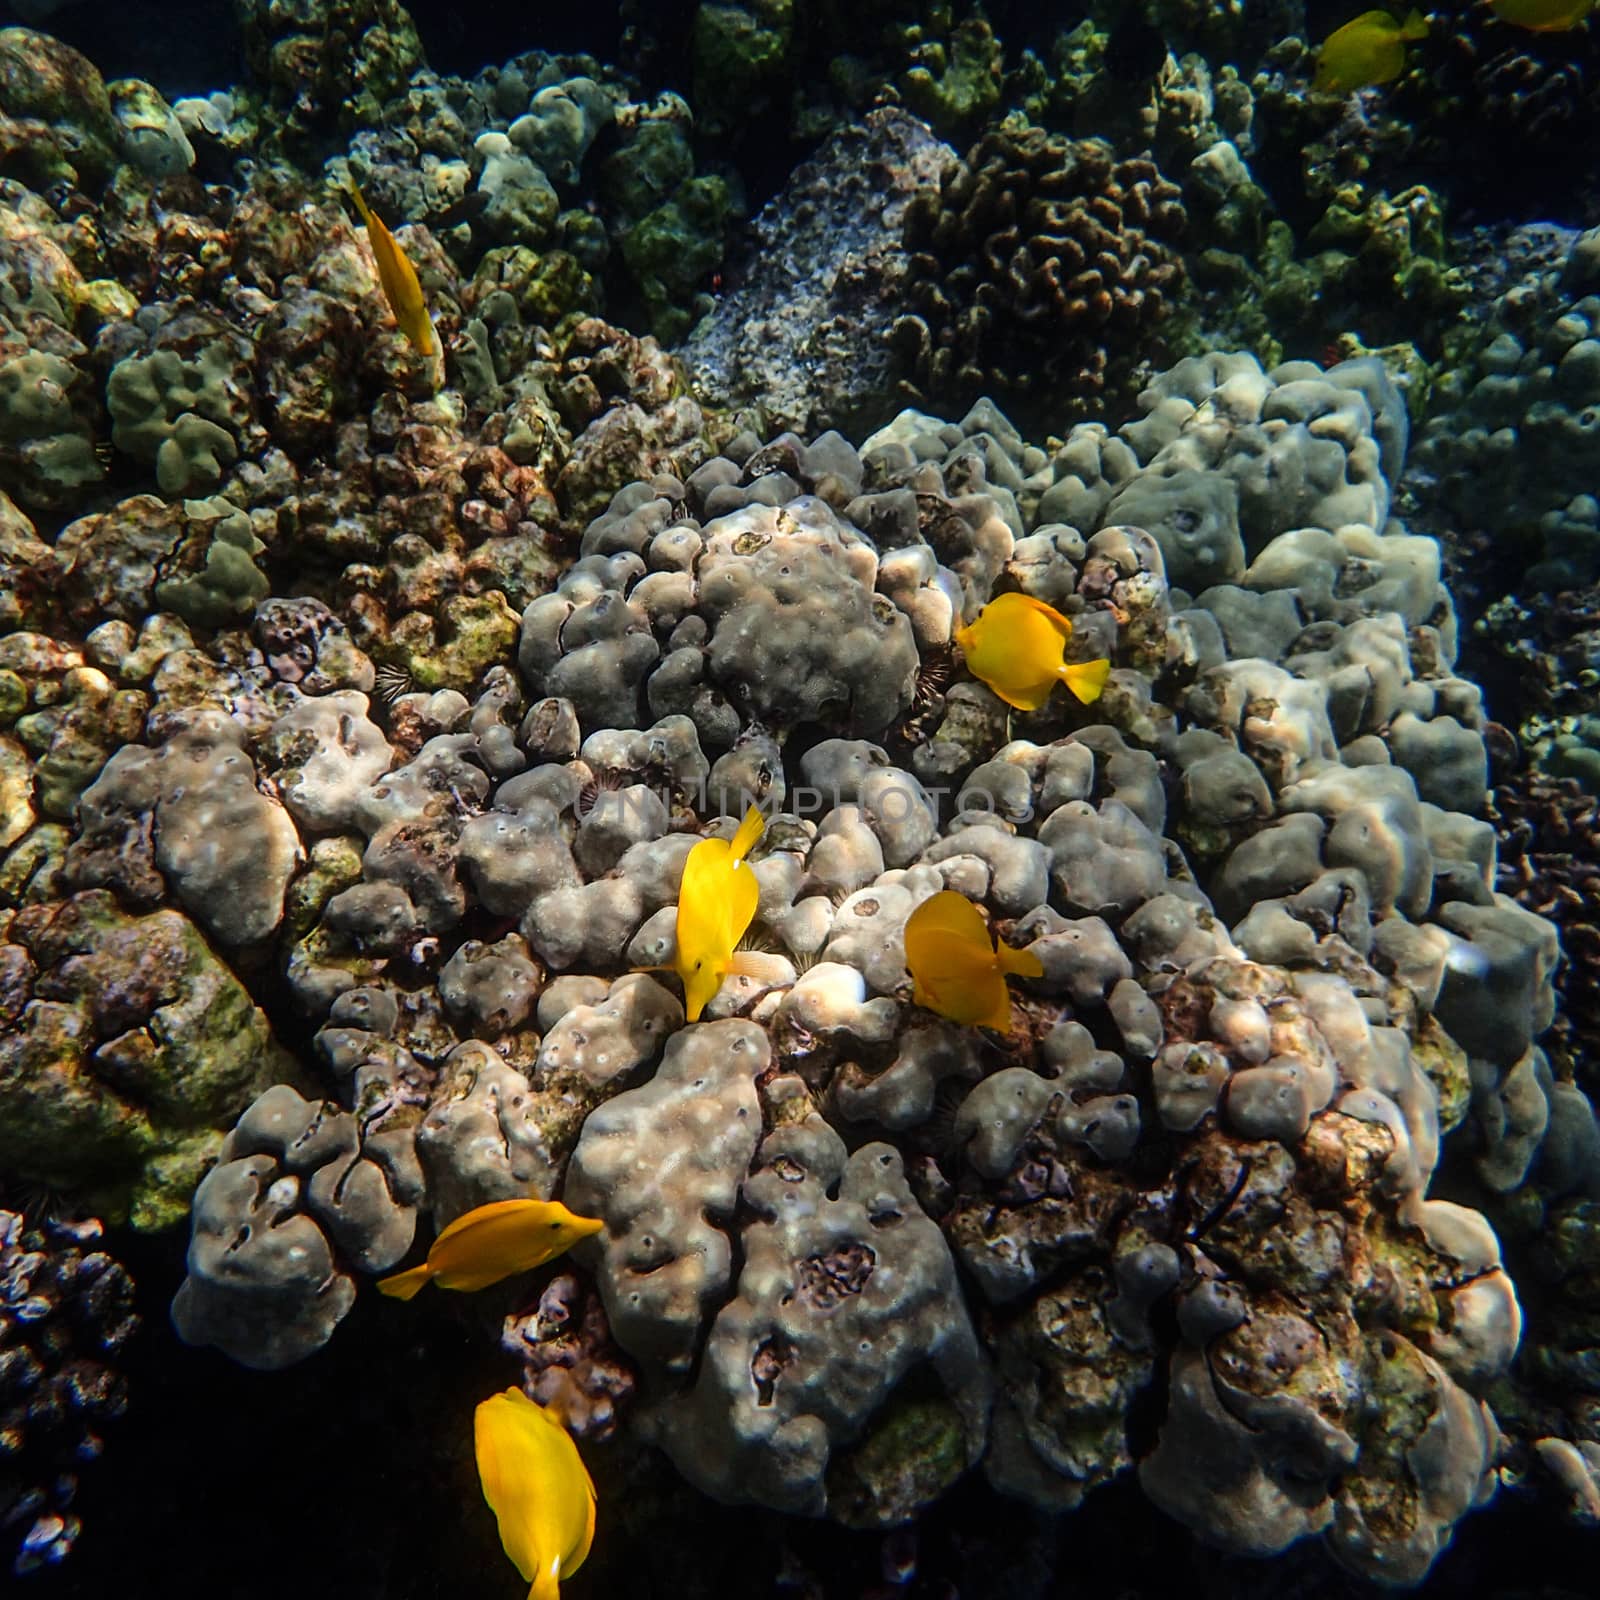 Yellow Tang Fish at a Reef in Hawaii by NikkiGensert